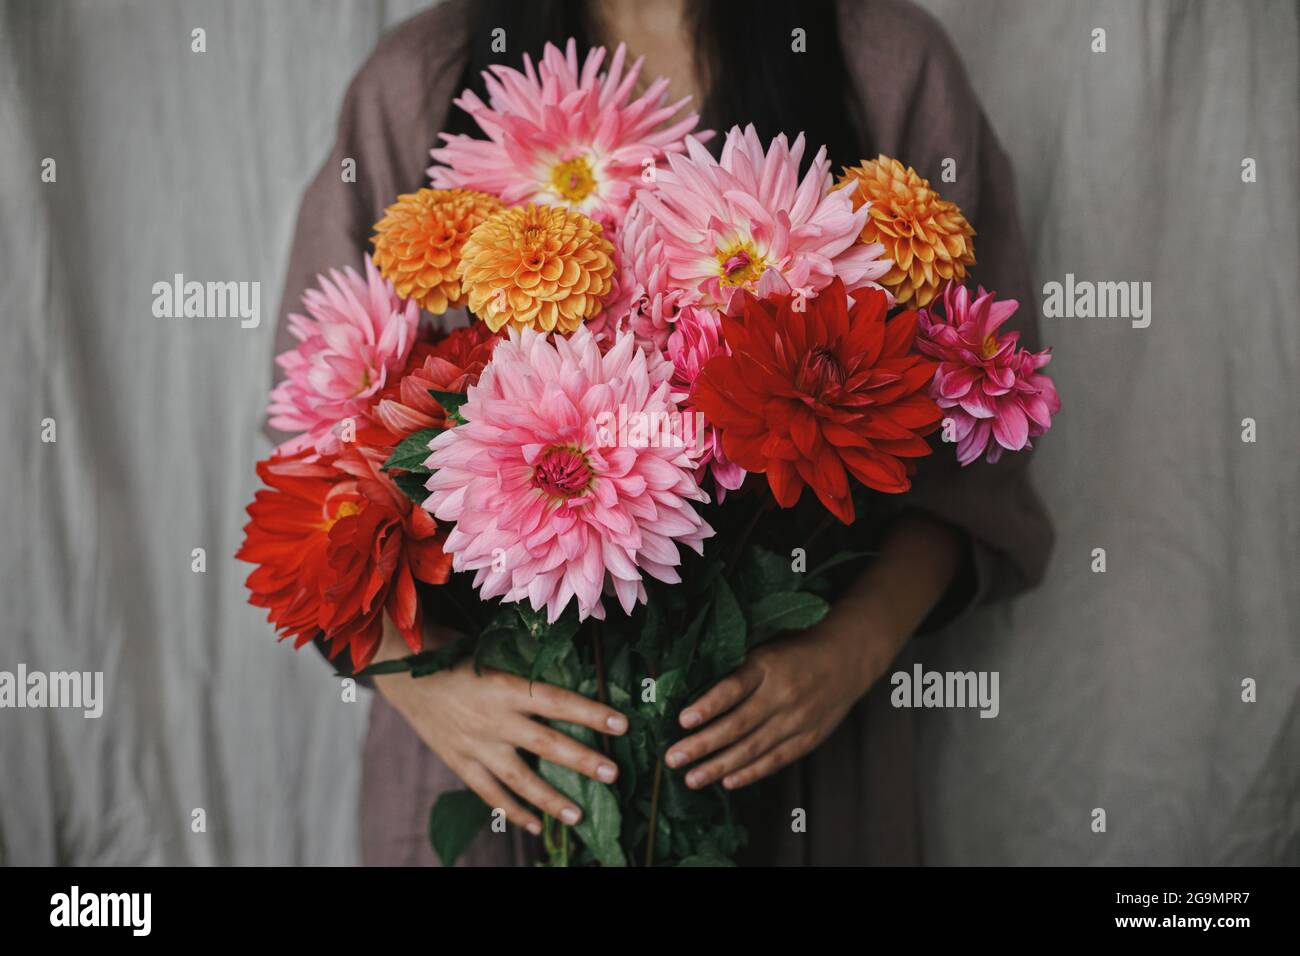 Woman holding autumn flowers bouquet in rustic room. Florist in linen dress holding beautiful colorful dahlias, aesthetic. Autumn season in countrysid Stock Photo